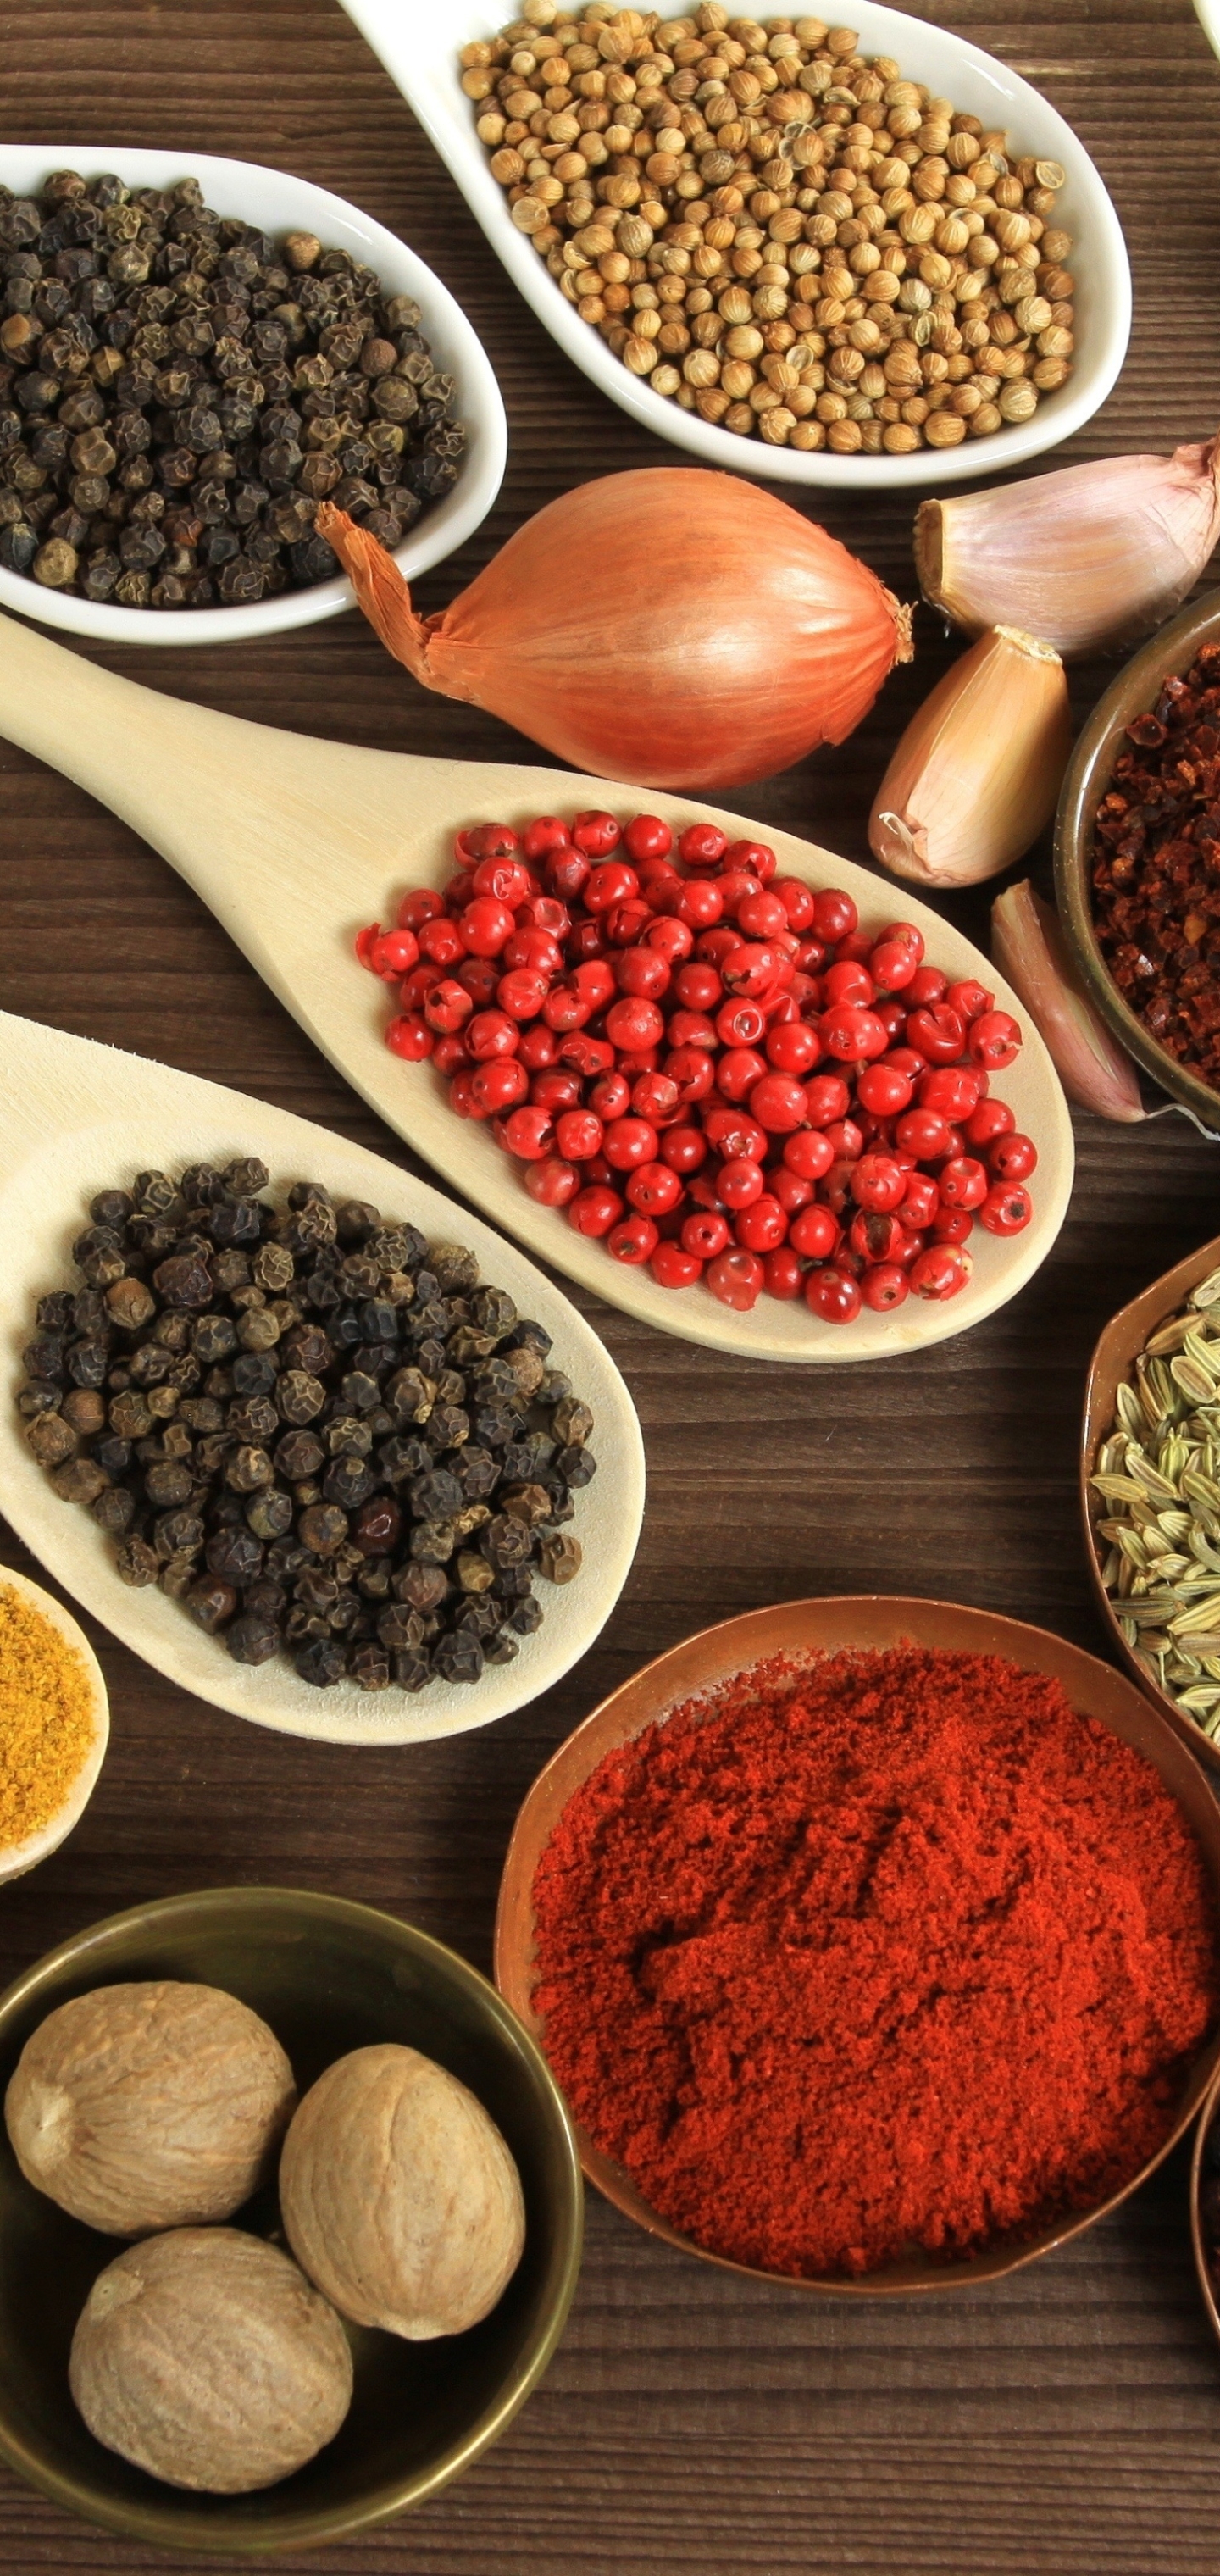 herbs and spices, food, herbs